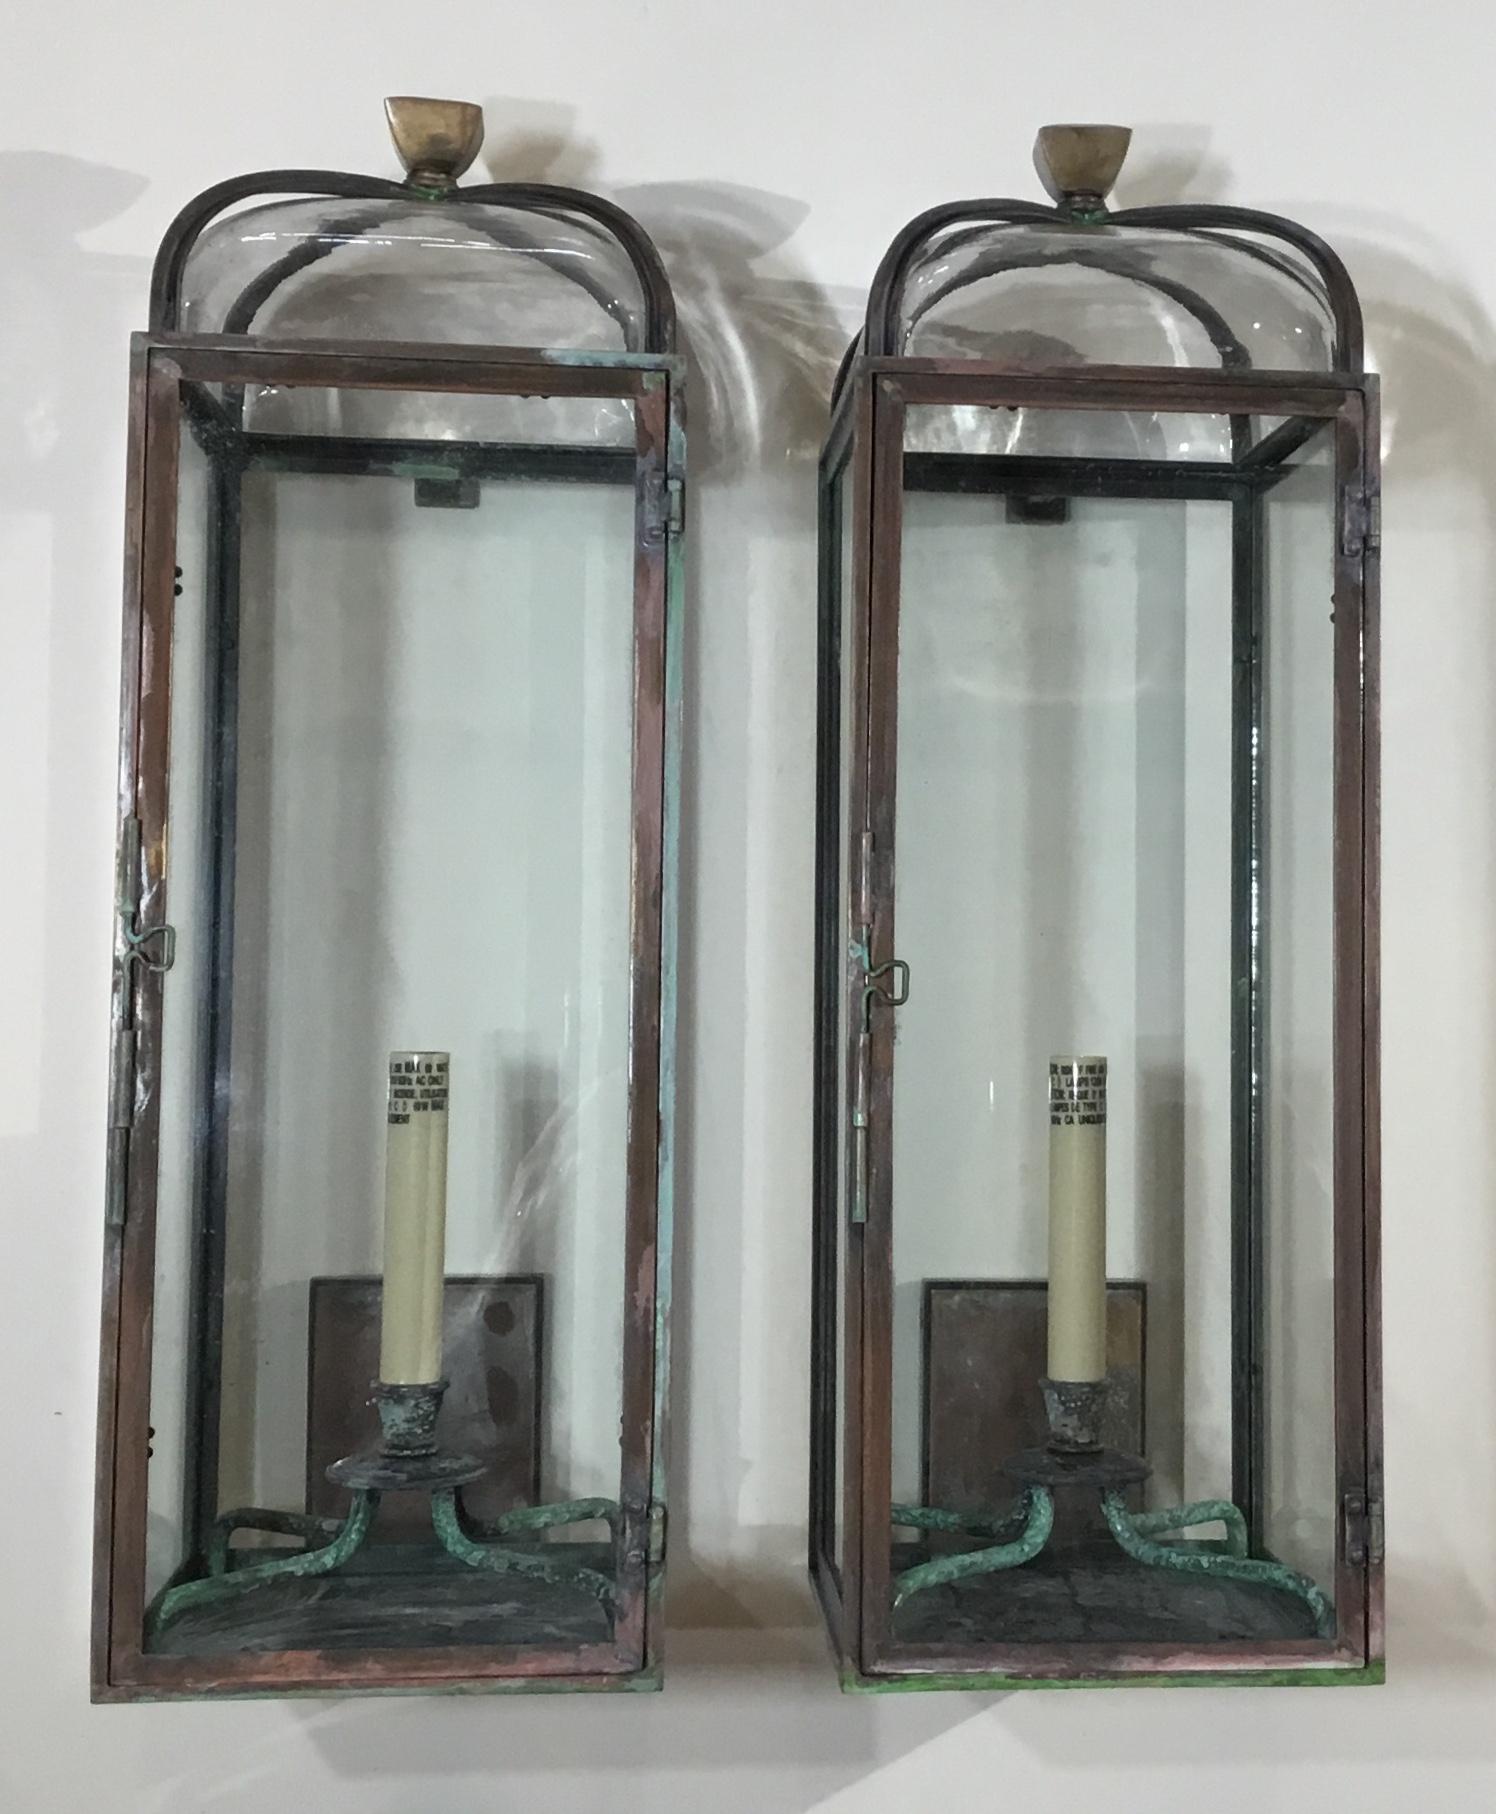 Elagent pair of wall hanging lantern, handcrafted from solid brass and bronze combine, to make this beautiful wall hanging lantern or sconses, exceptional glass dome with very attractive top finial.
Electrified with one 60/watt light, suitable for